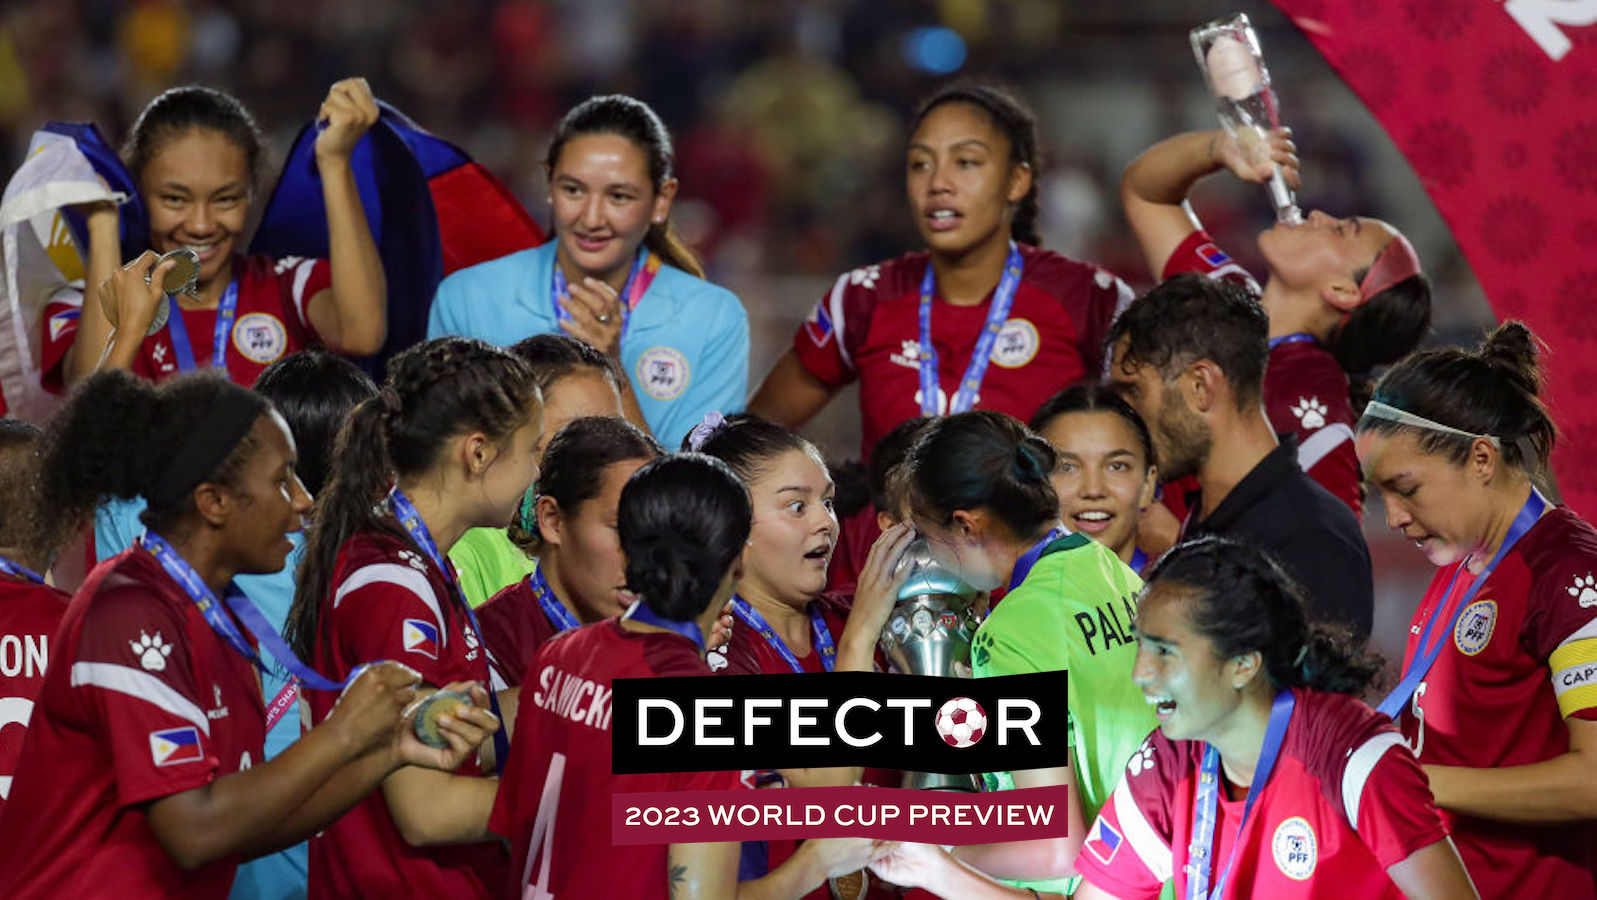 The Philippine National Women’s Football Team celebrates after winning the championship match against Thailand for the ASEAN Football Federation (AFF) Women’s Championship held at the Rizal Memorial Stadium in Manila, Philippines on 17 July 2022.